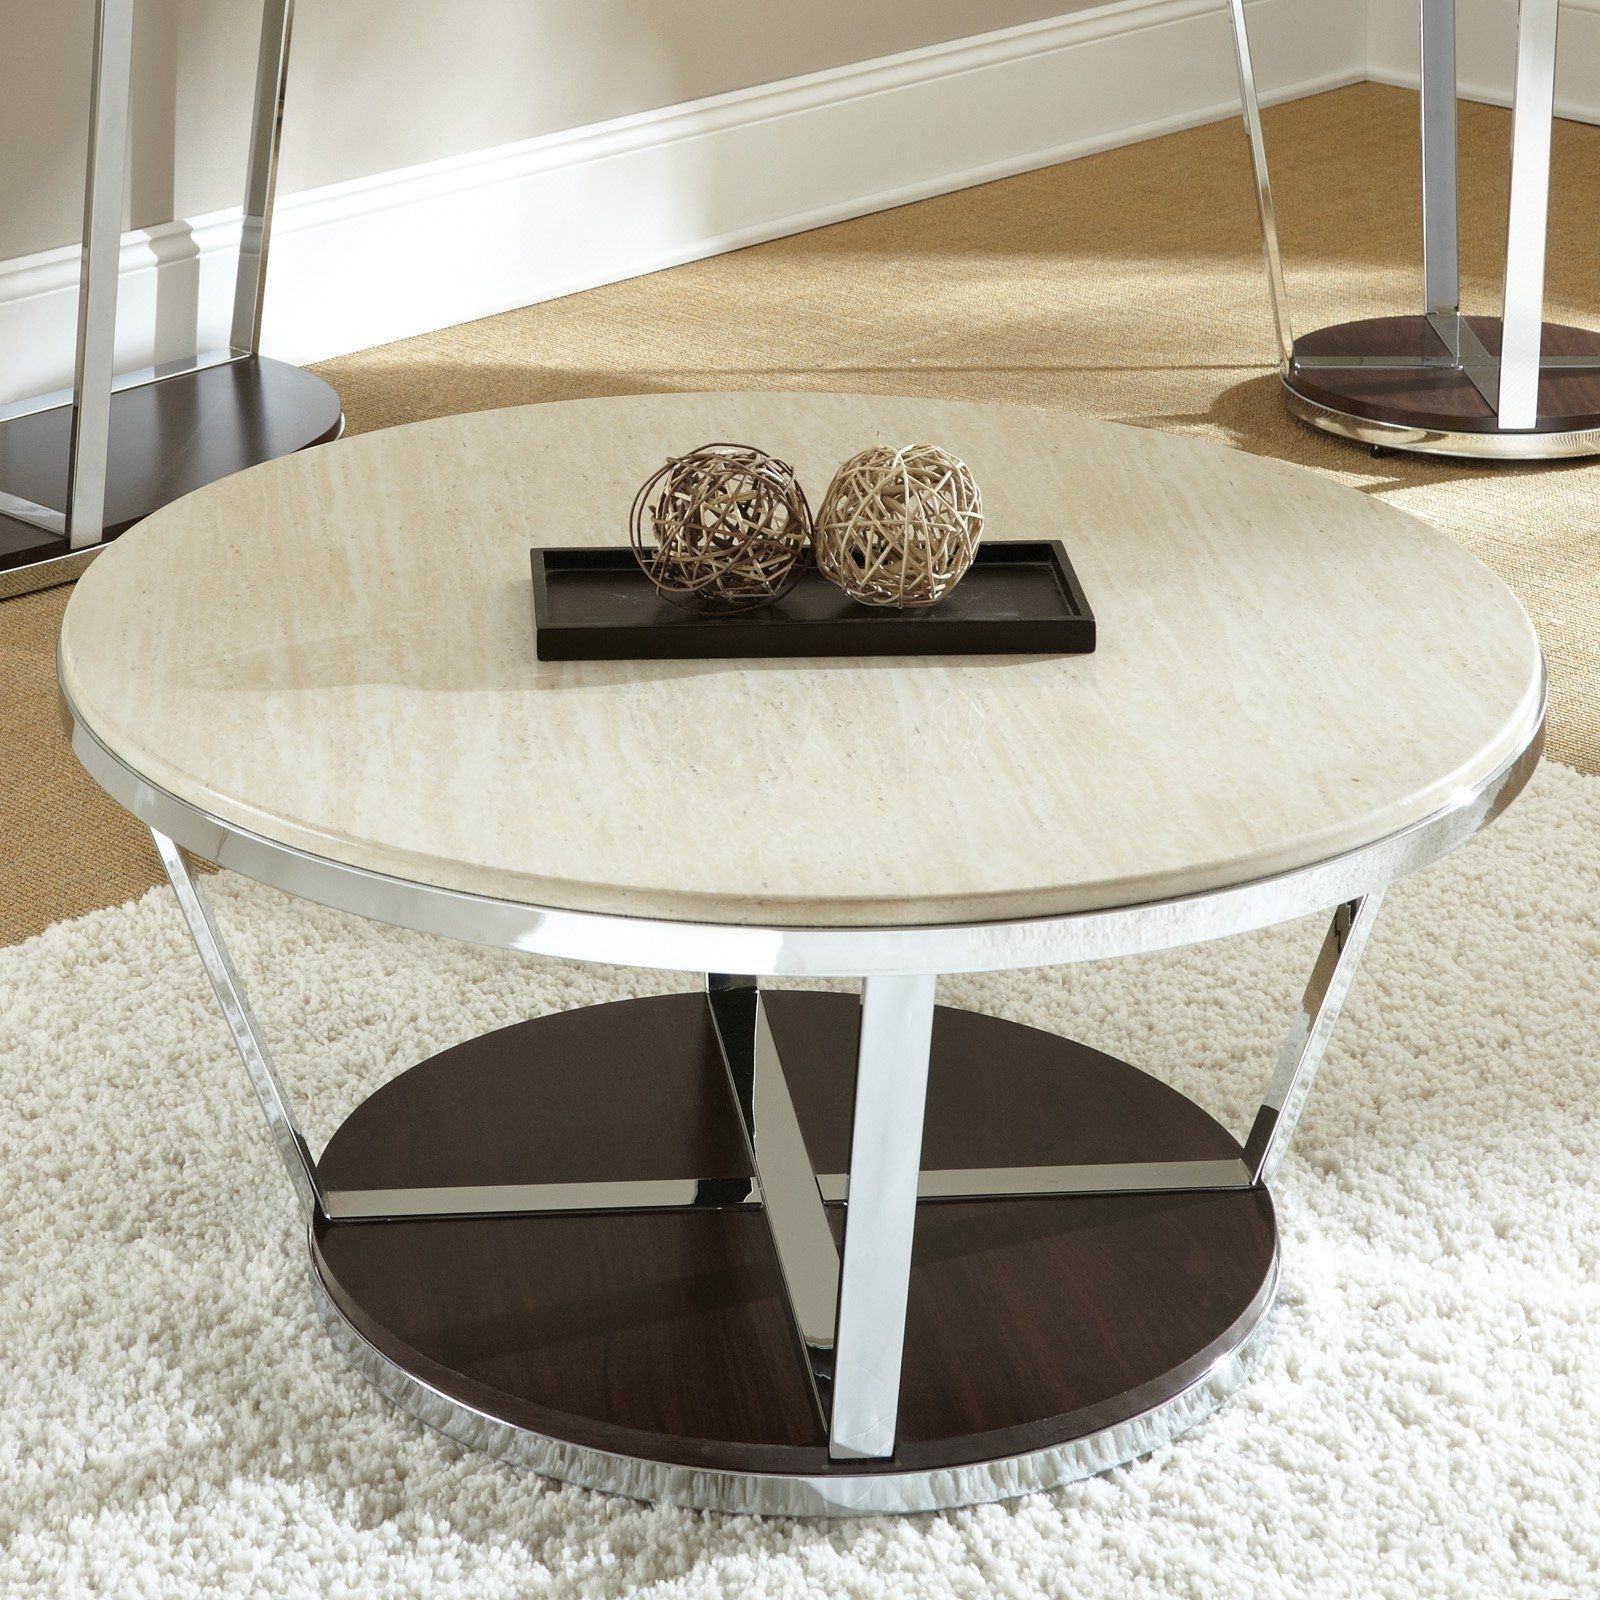 Marble Round Coffee Table | Furniture Design Within Smart Large Round Marble Top Coffee Tables (View 2 of 30)